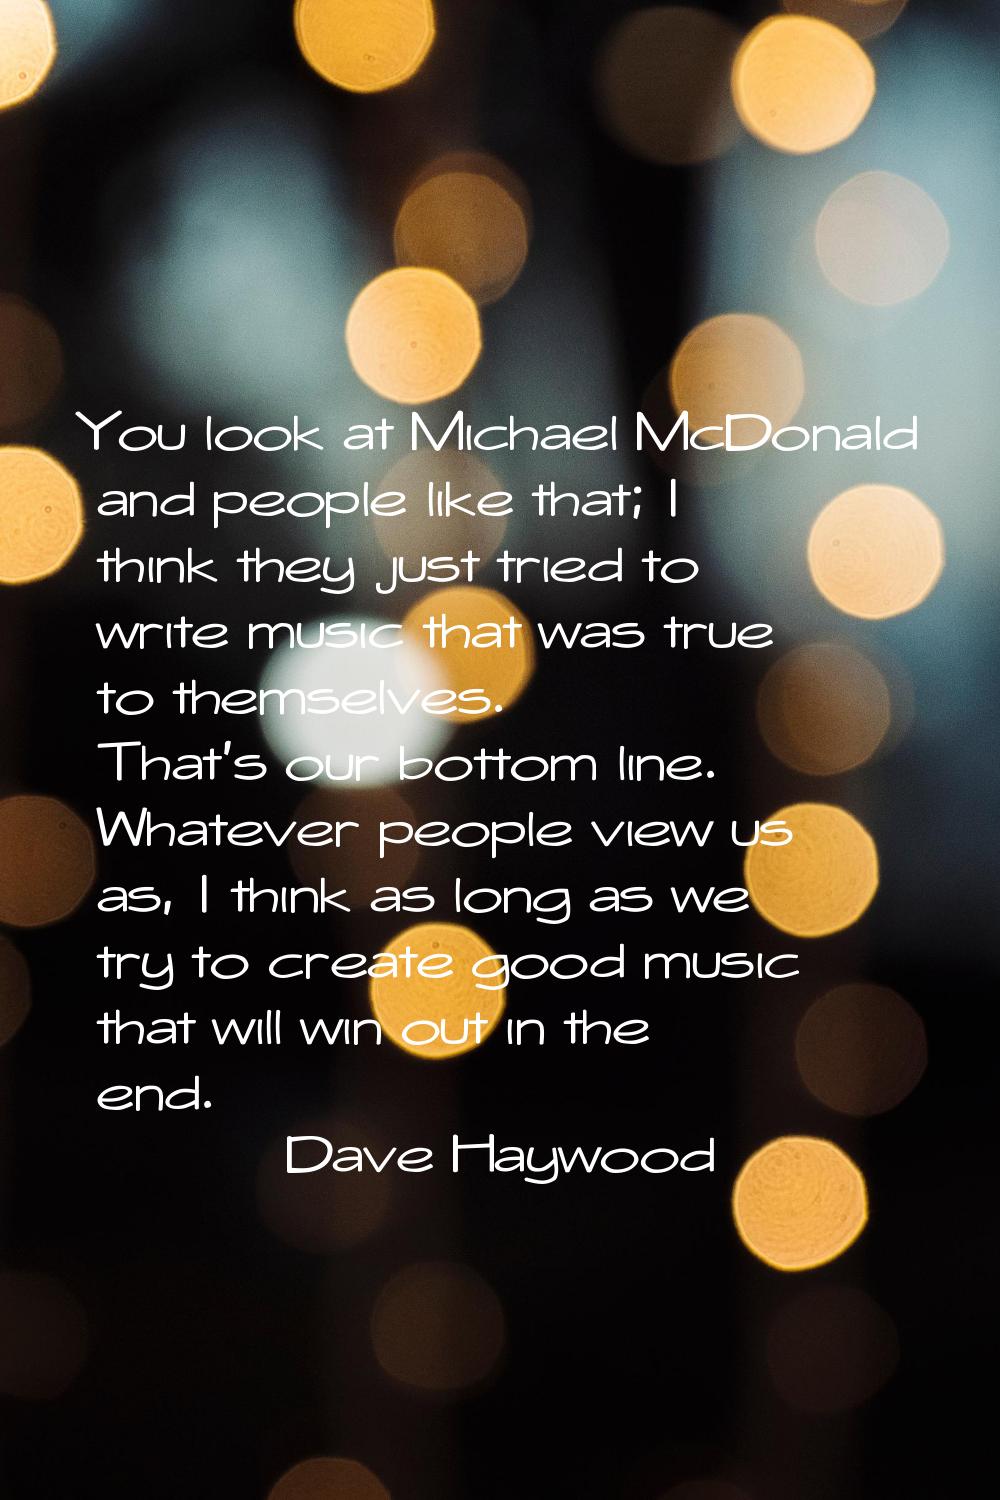 You look at Michael McDonald and people like that; I think they just tried to write music that was 